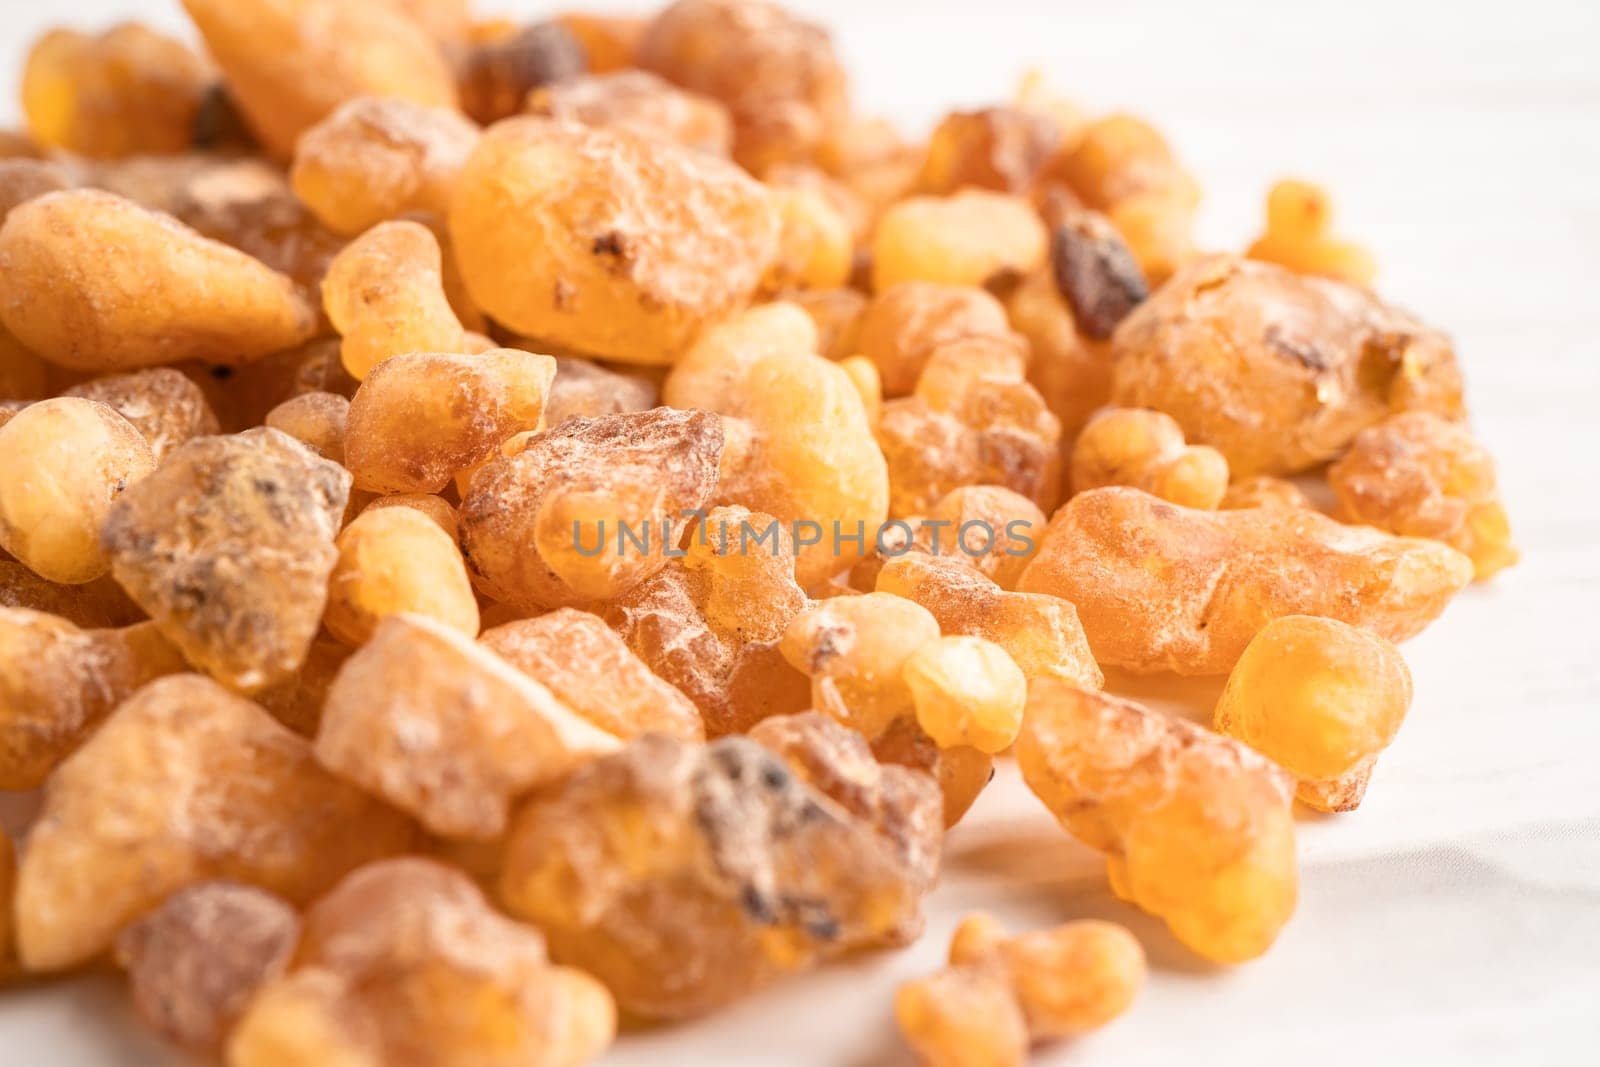 Frankincense or olibanum aromatic resin used in incense and perfumes. by pamai